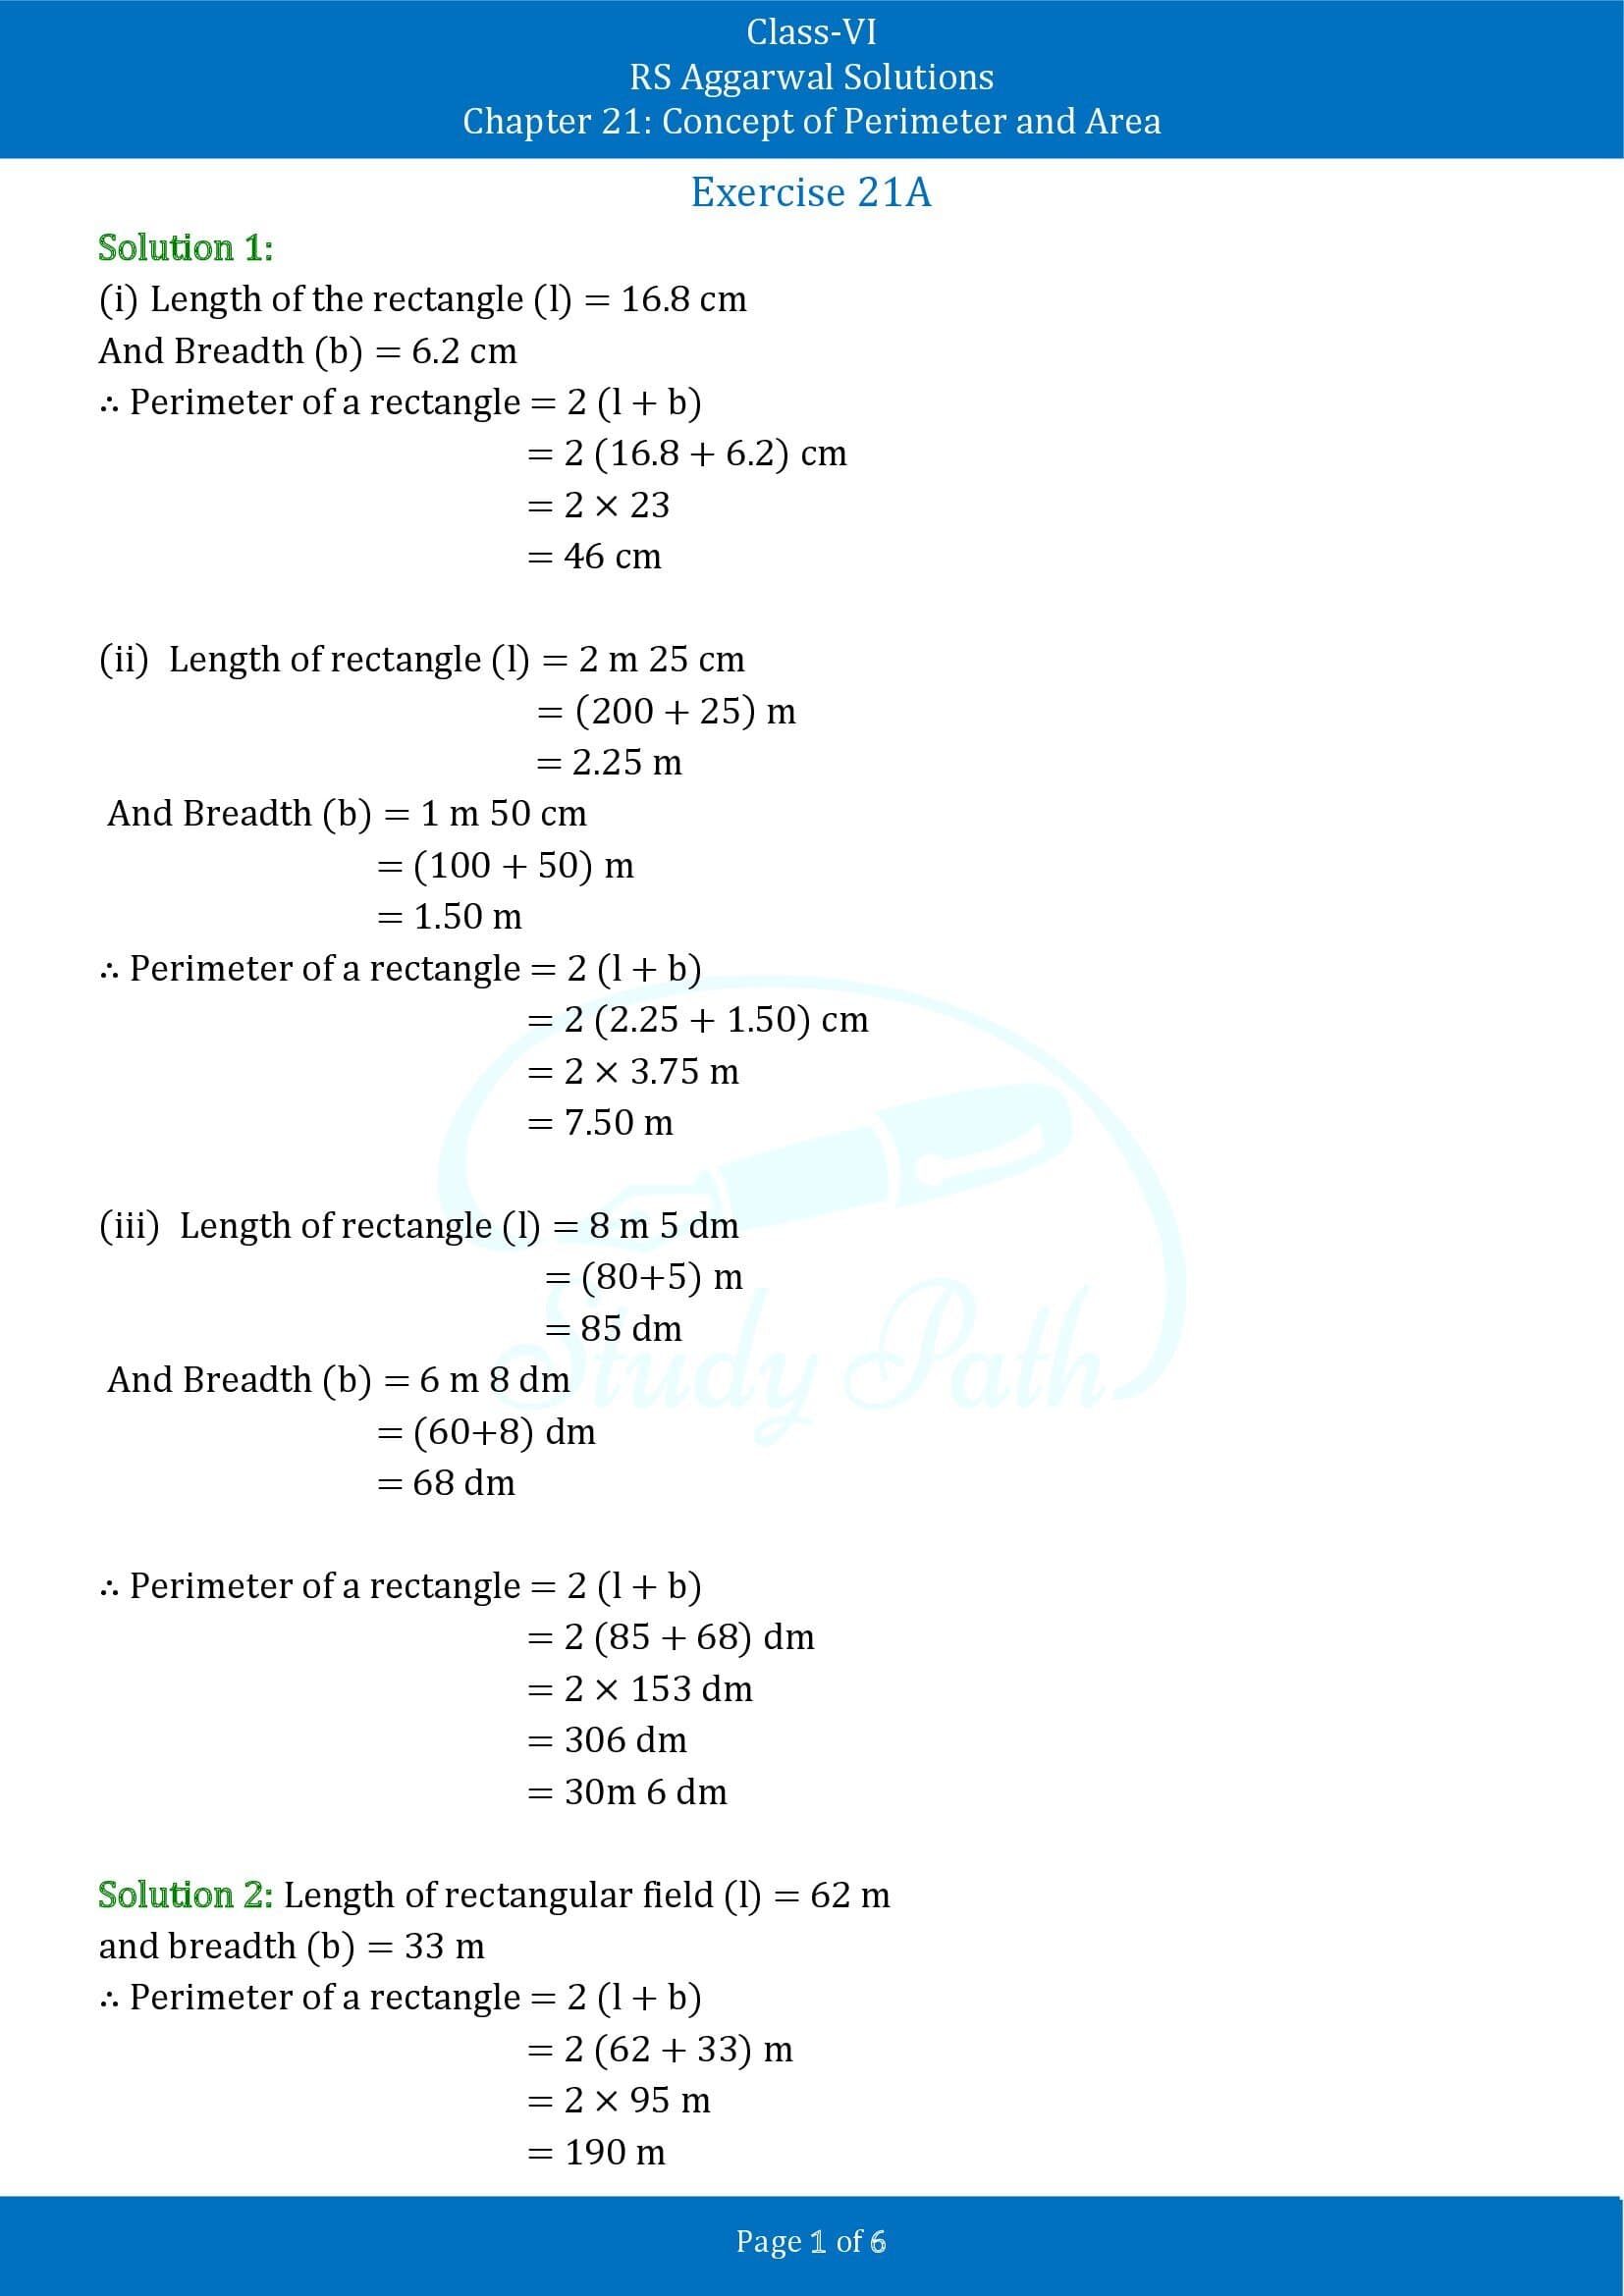 RS Aggarwal Solutions Class 6 Chapter 21 Concept of Perimeter and Area Exercise 21A 00001